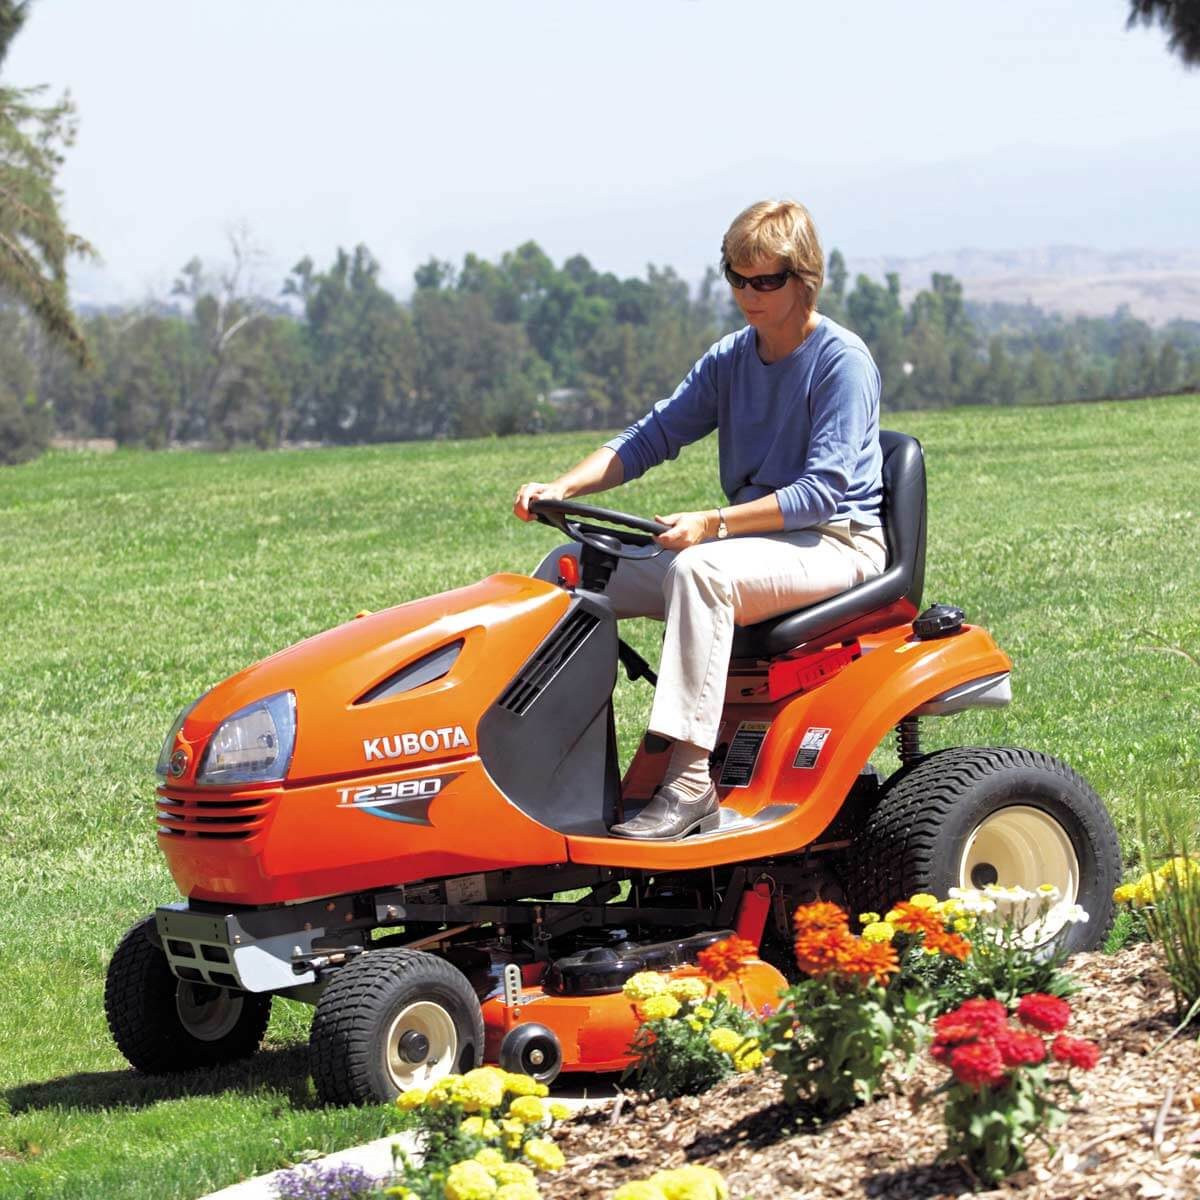 Rider, Lawn Tractor, Garden Tractor: What’s the Difference?